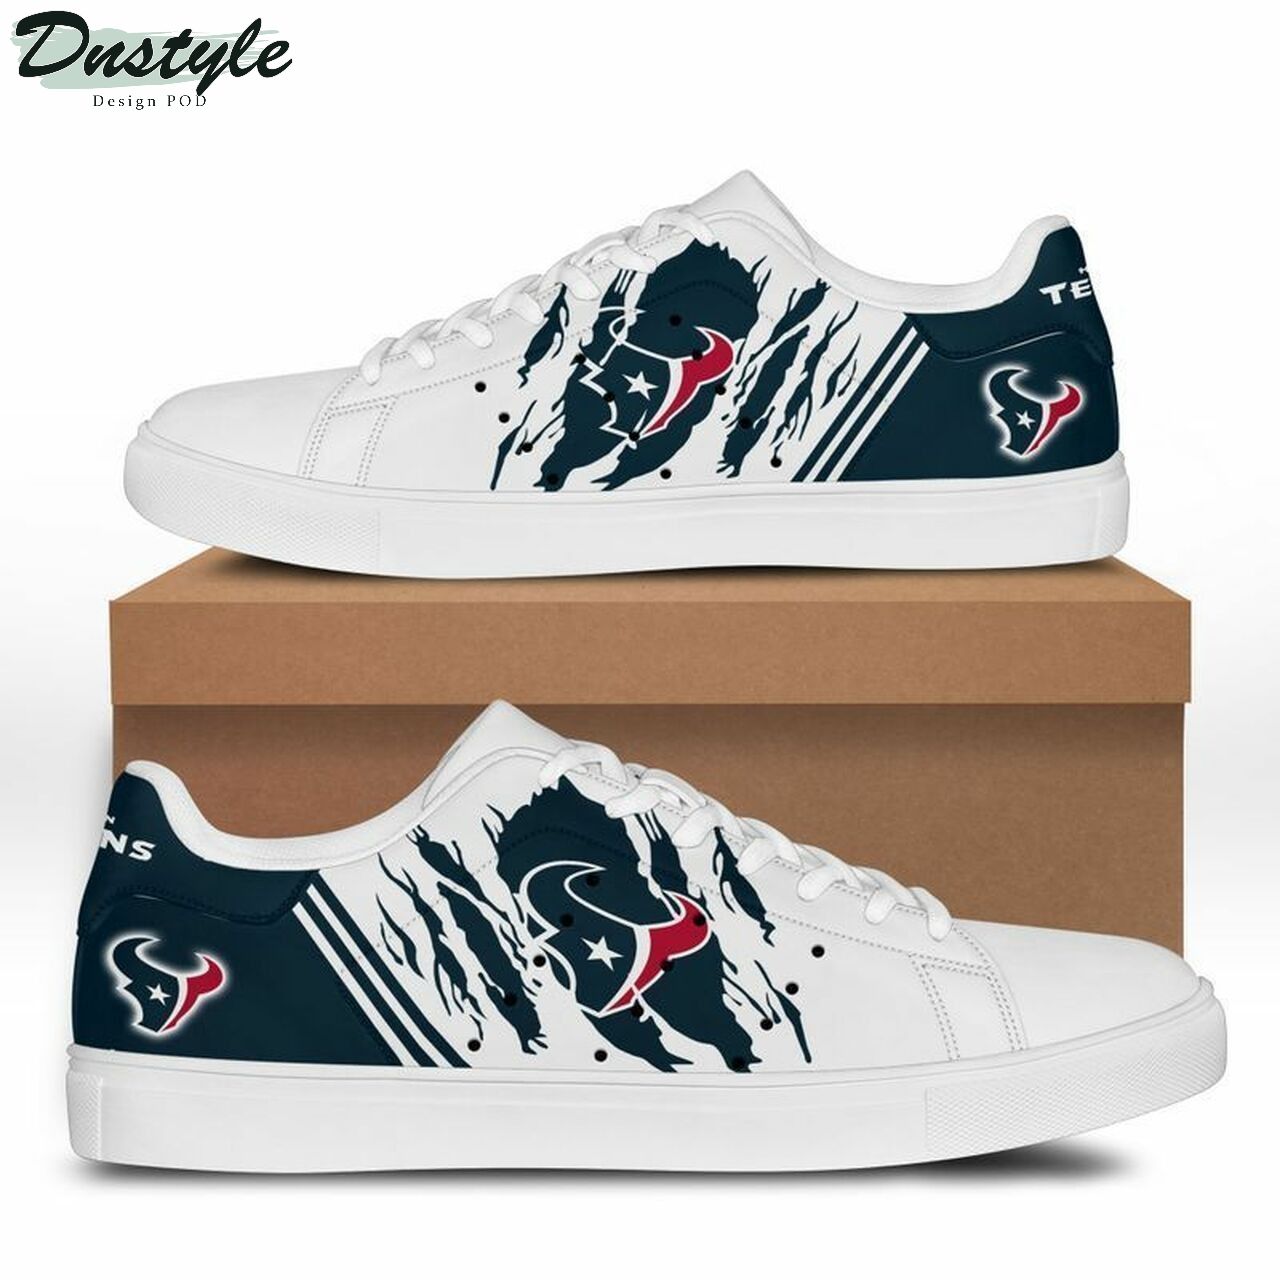 NFL Houston Texans stan smith low top skate shoes